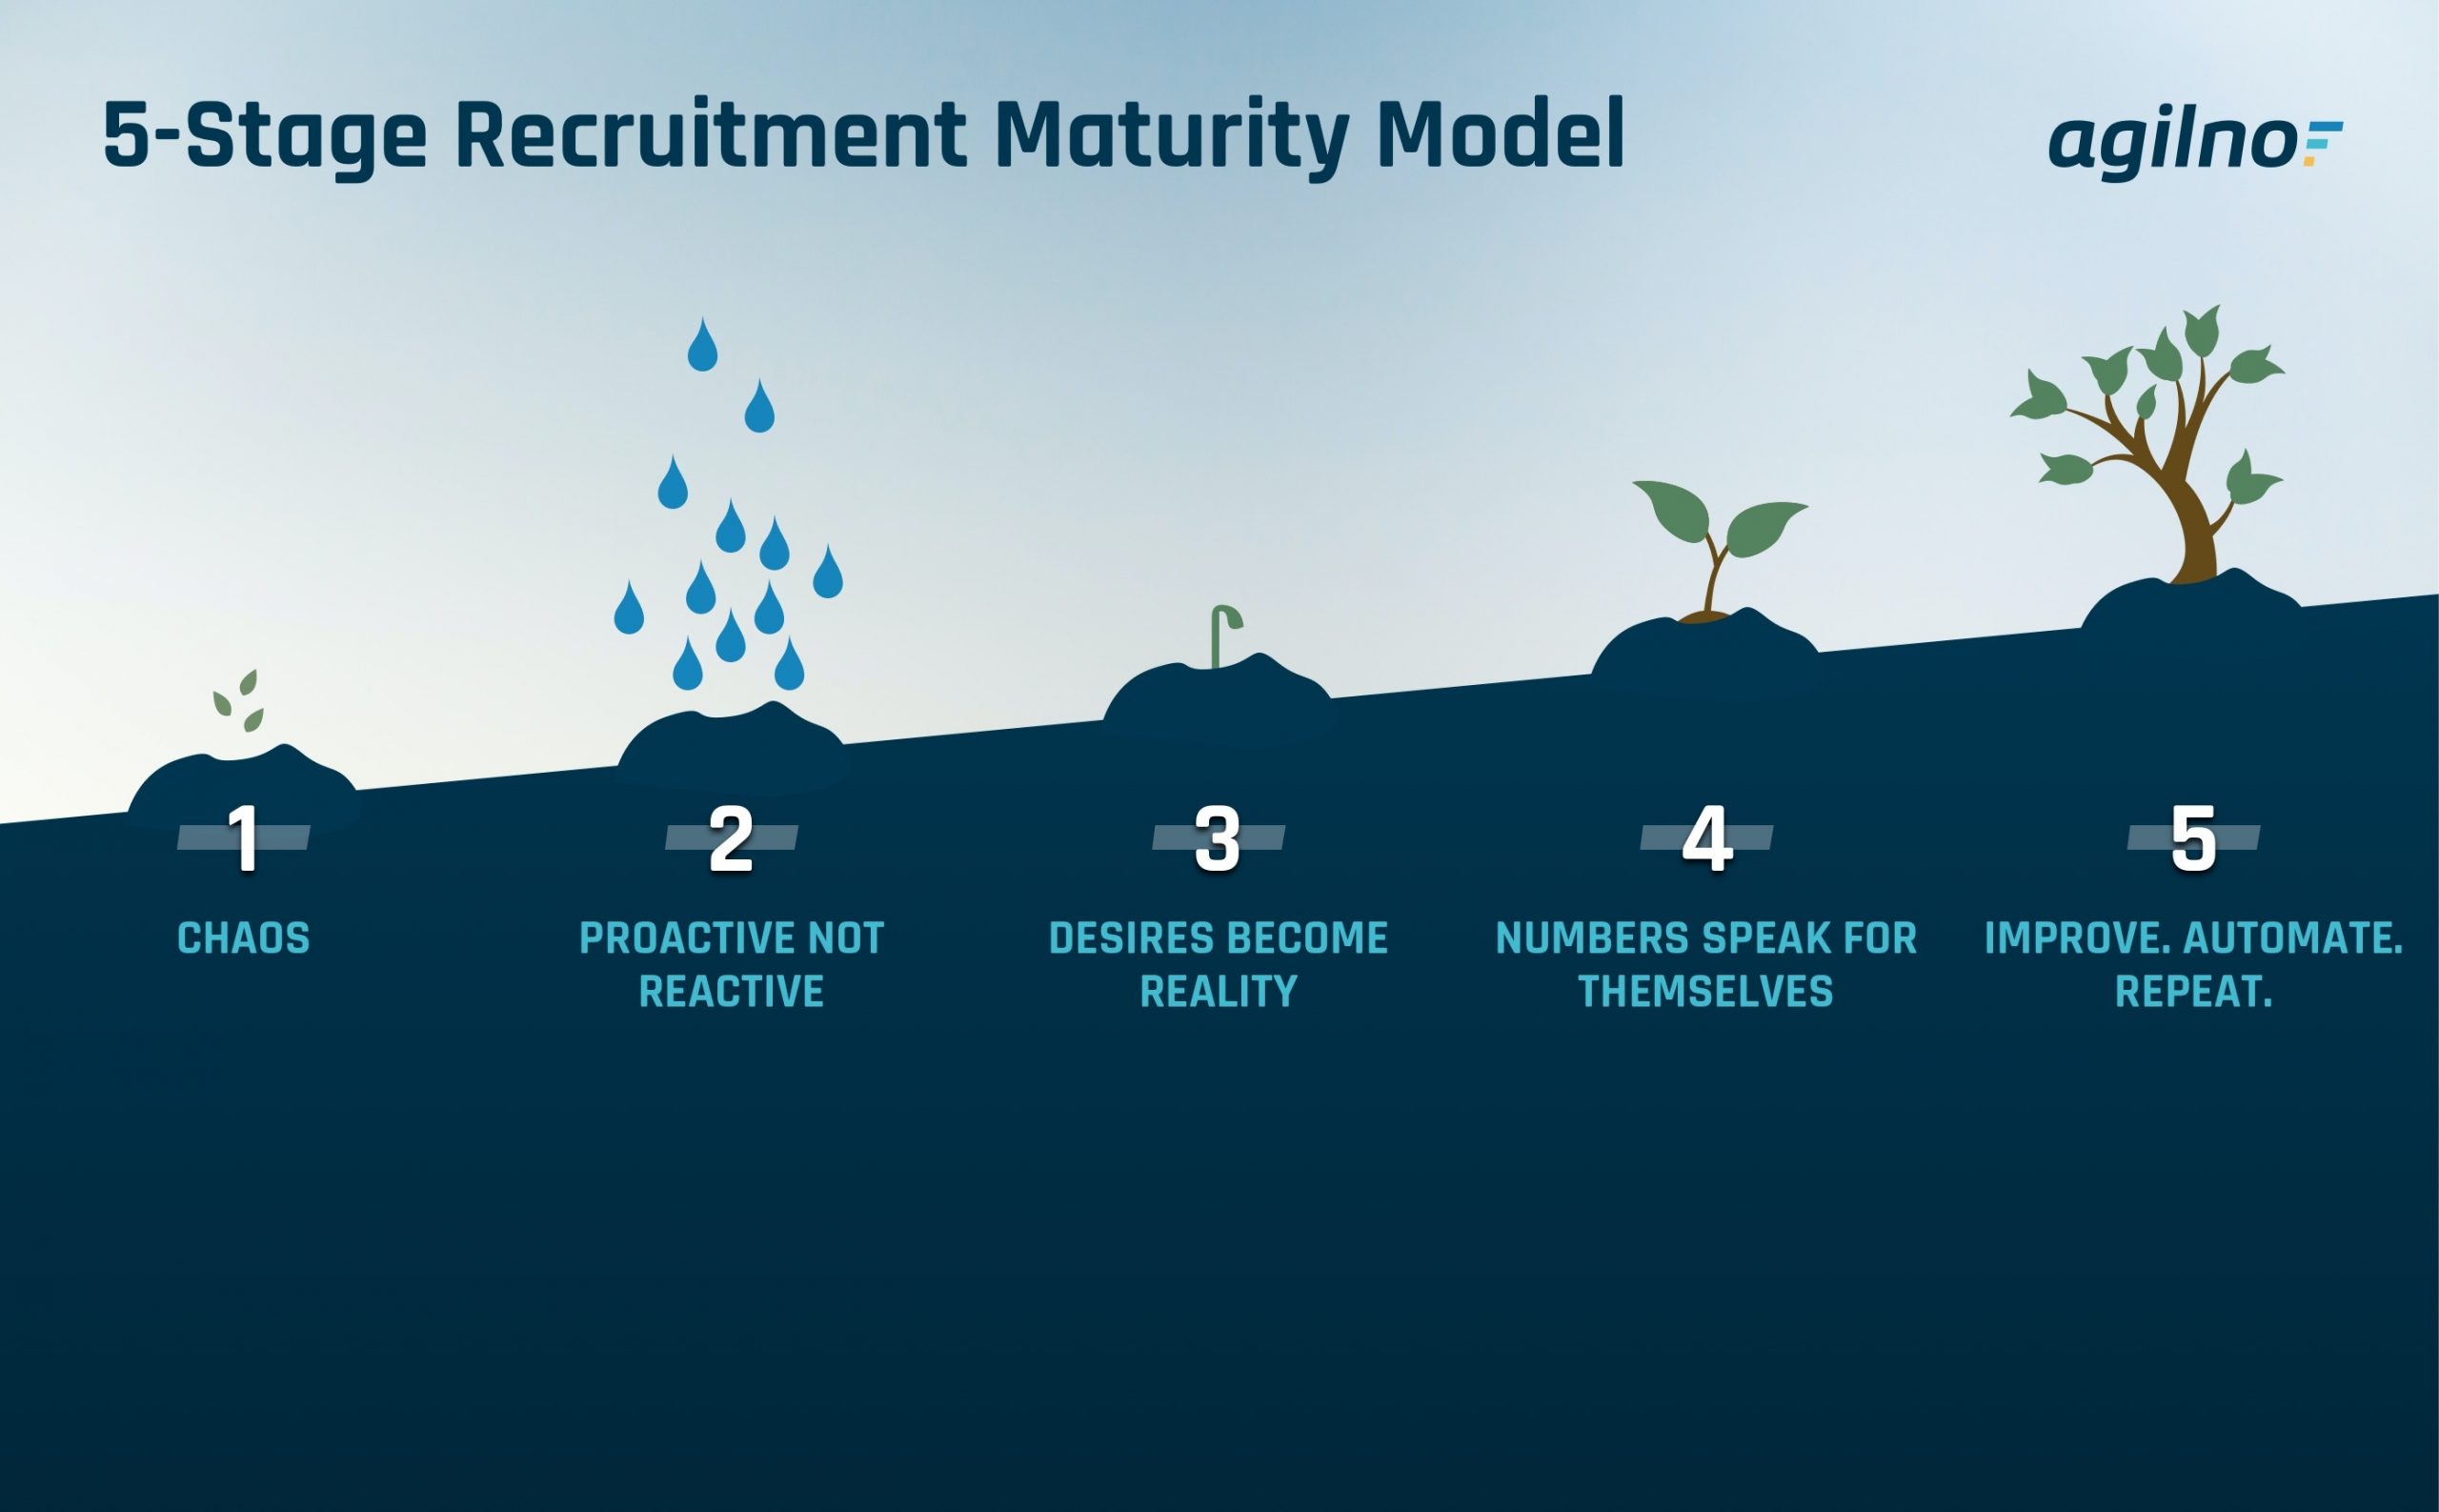 Find gaps in your recruitment process with the QA 5-stage maturity model